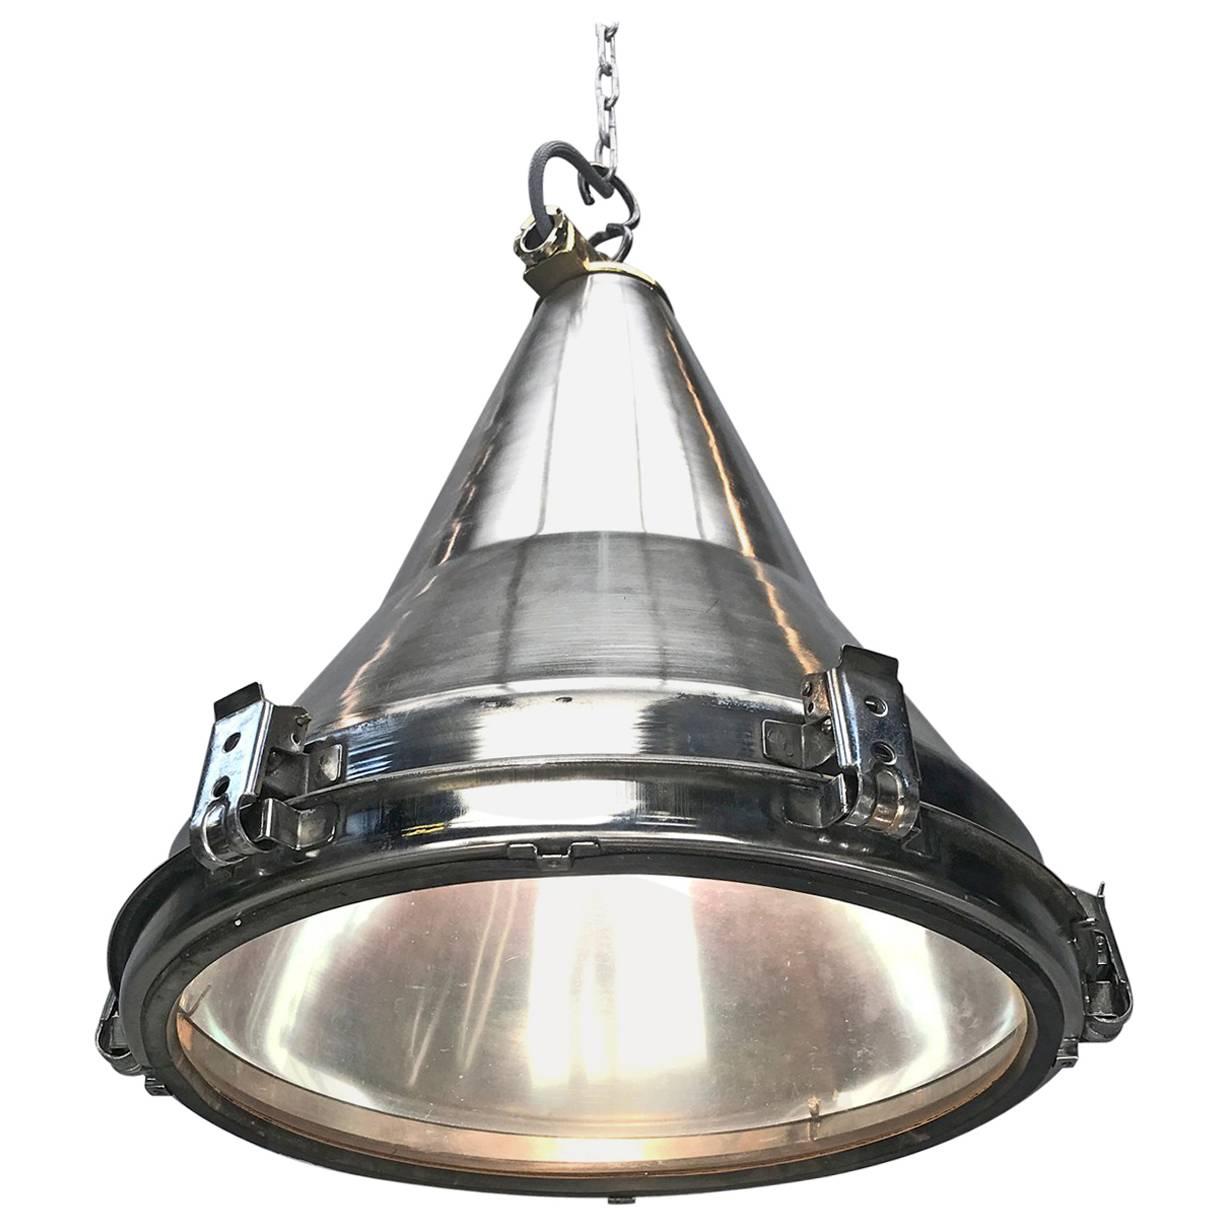 A reclaimed industrial stainless steel conical ceiling pendant. 

This light fixture is one of many reclaimed from decommissioned cargo ships made in Korea c1980 and is very well designed and constructed.  They were originally used on masts and